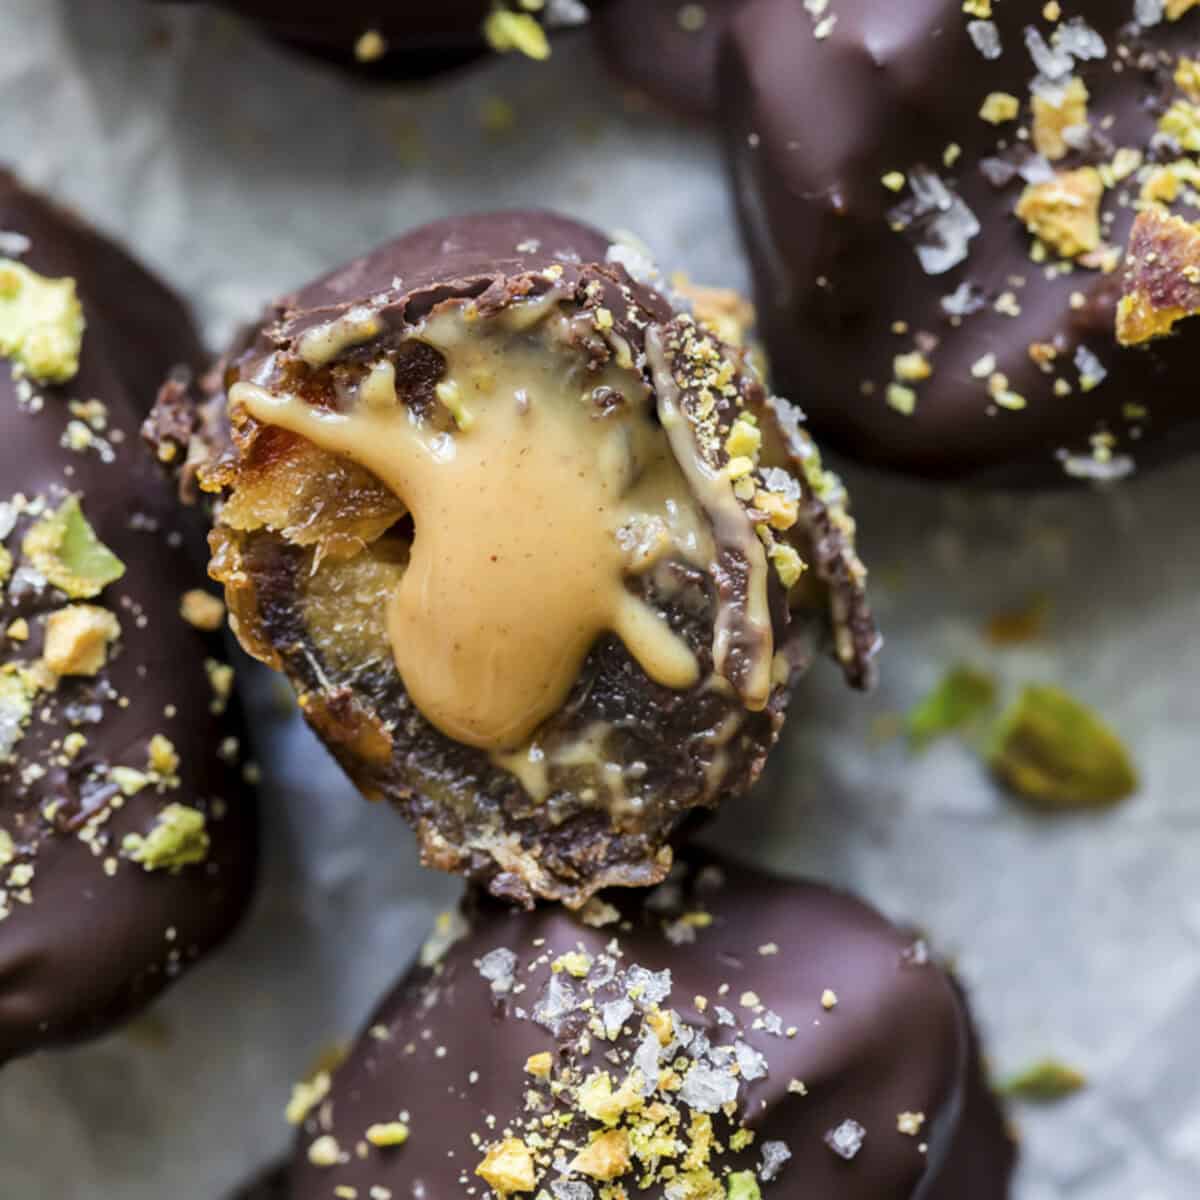 Cracked open peanut butter stuffed oozing from a chocolate coated date.